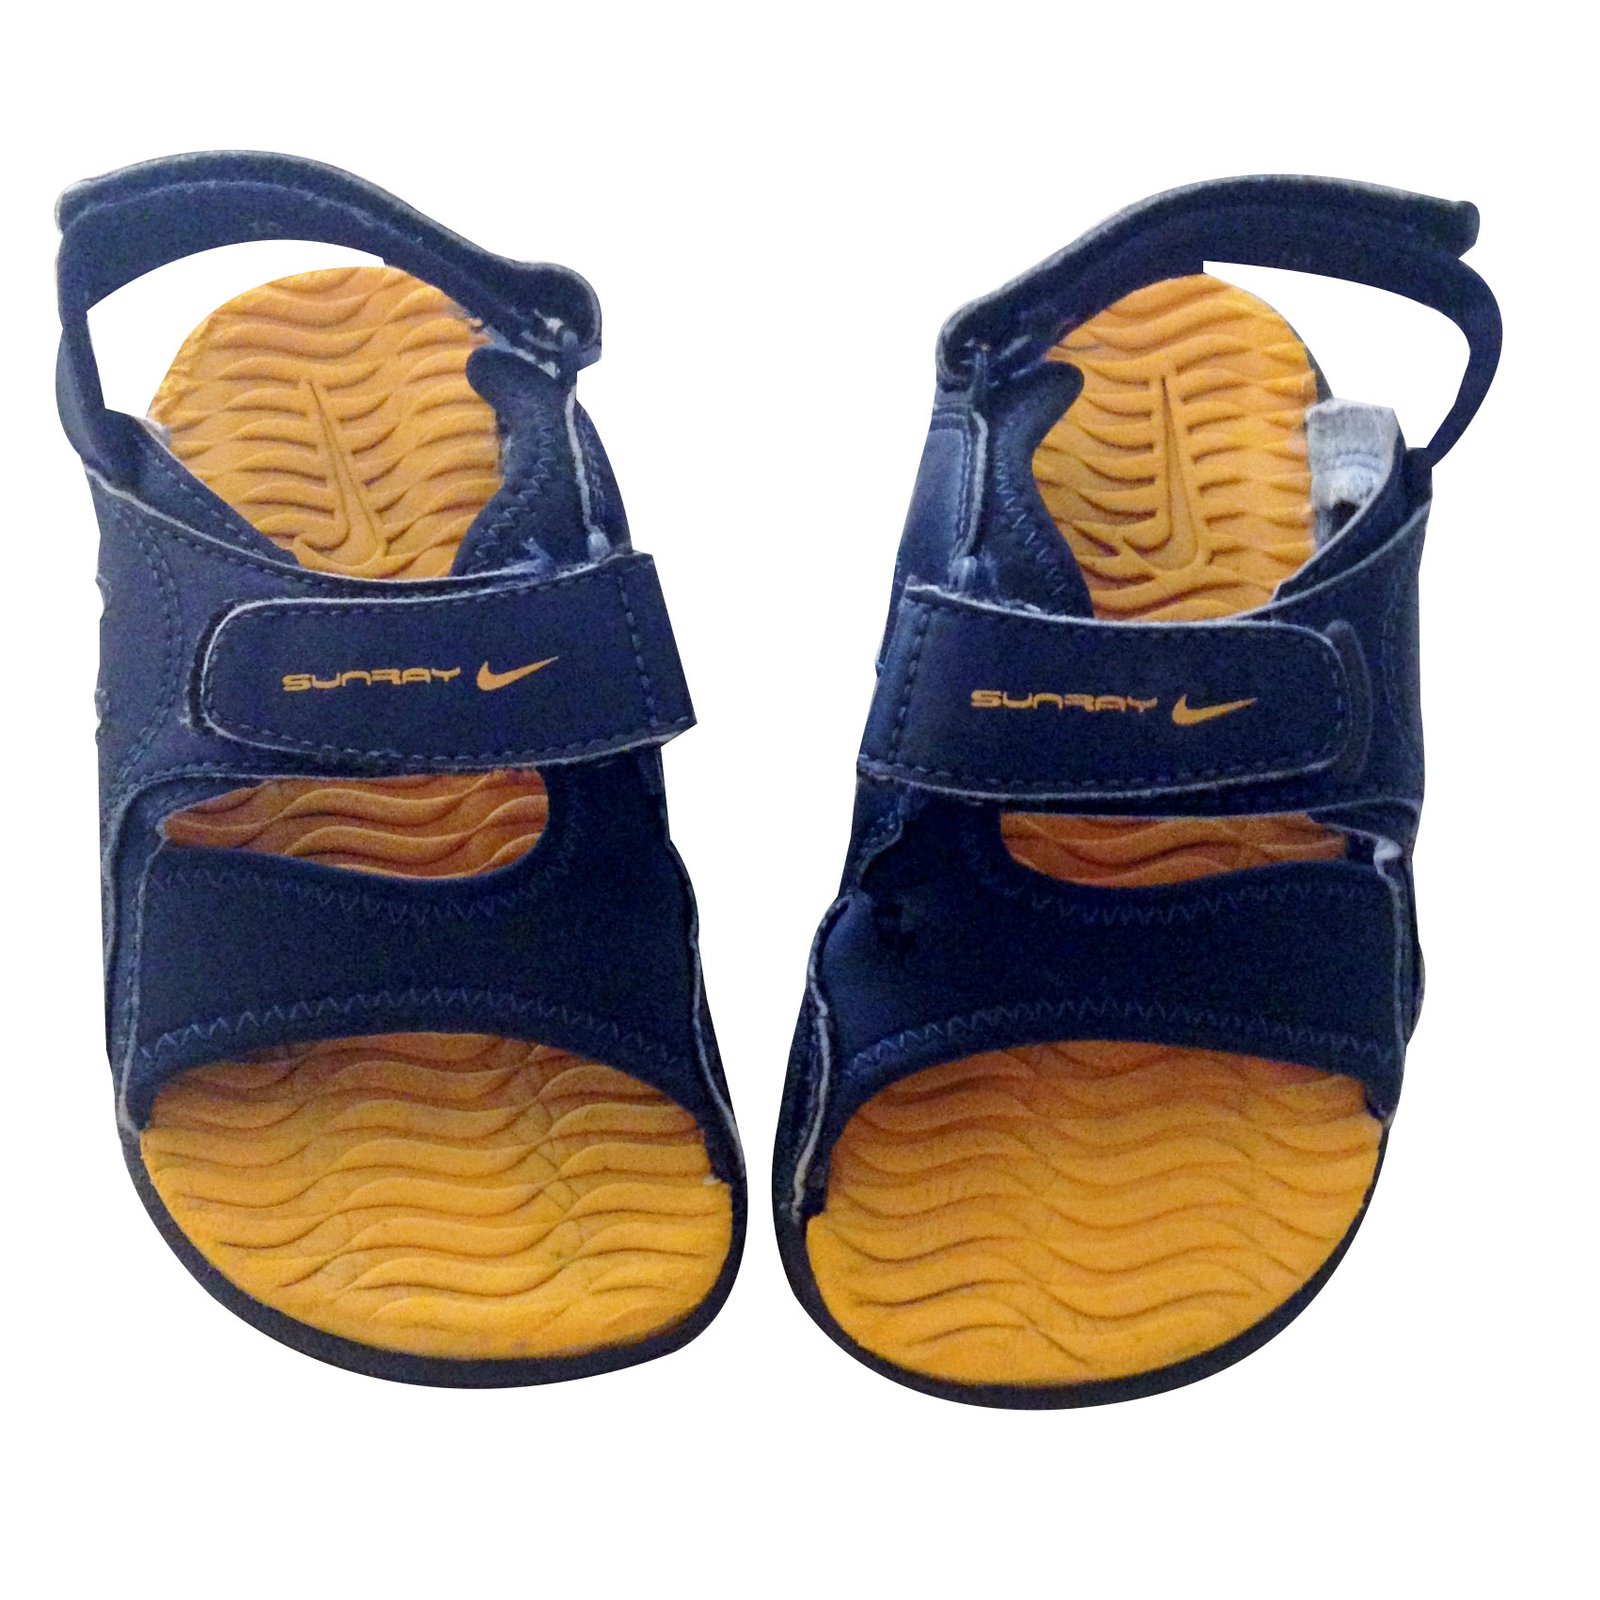 nike play sandals